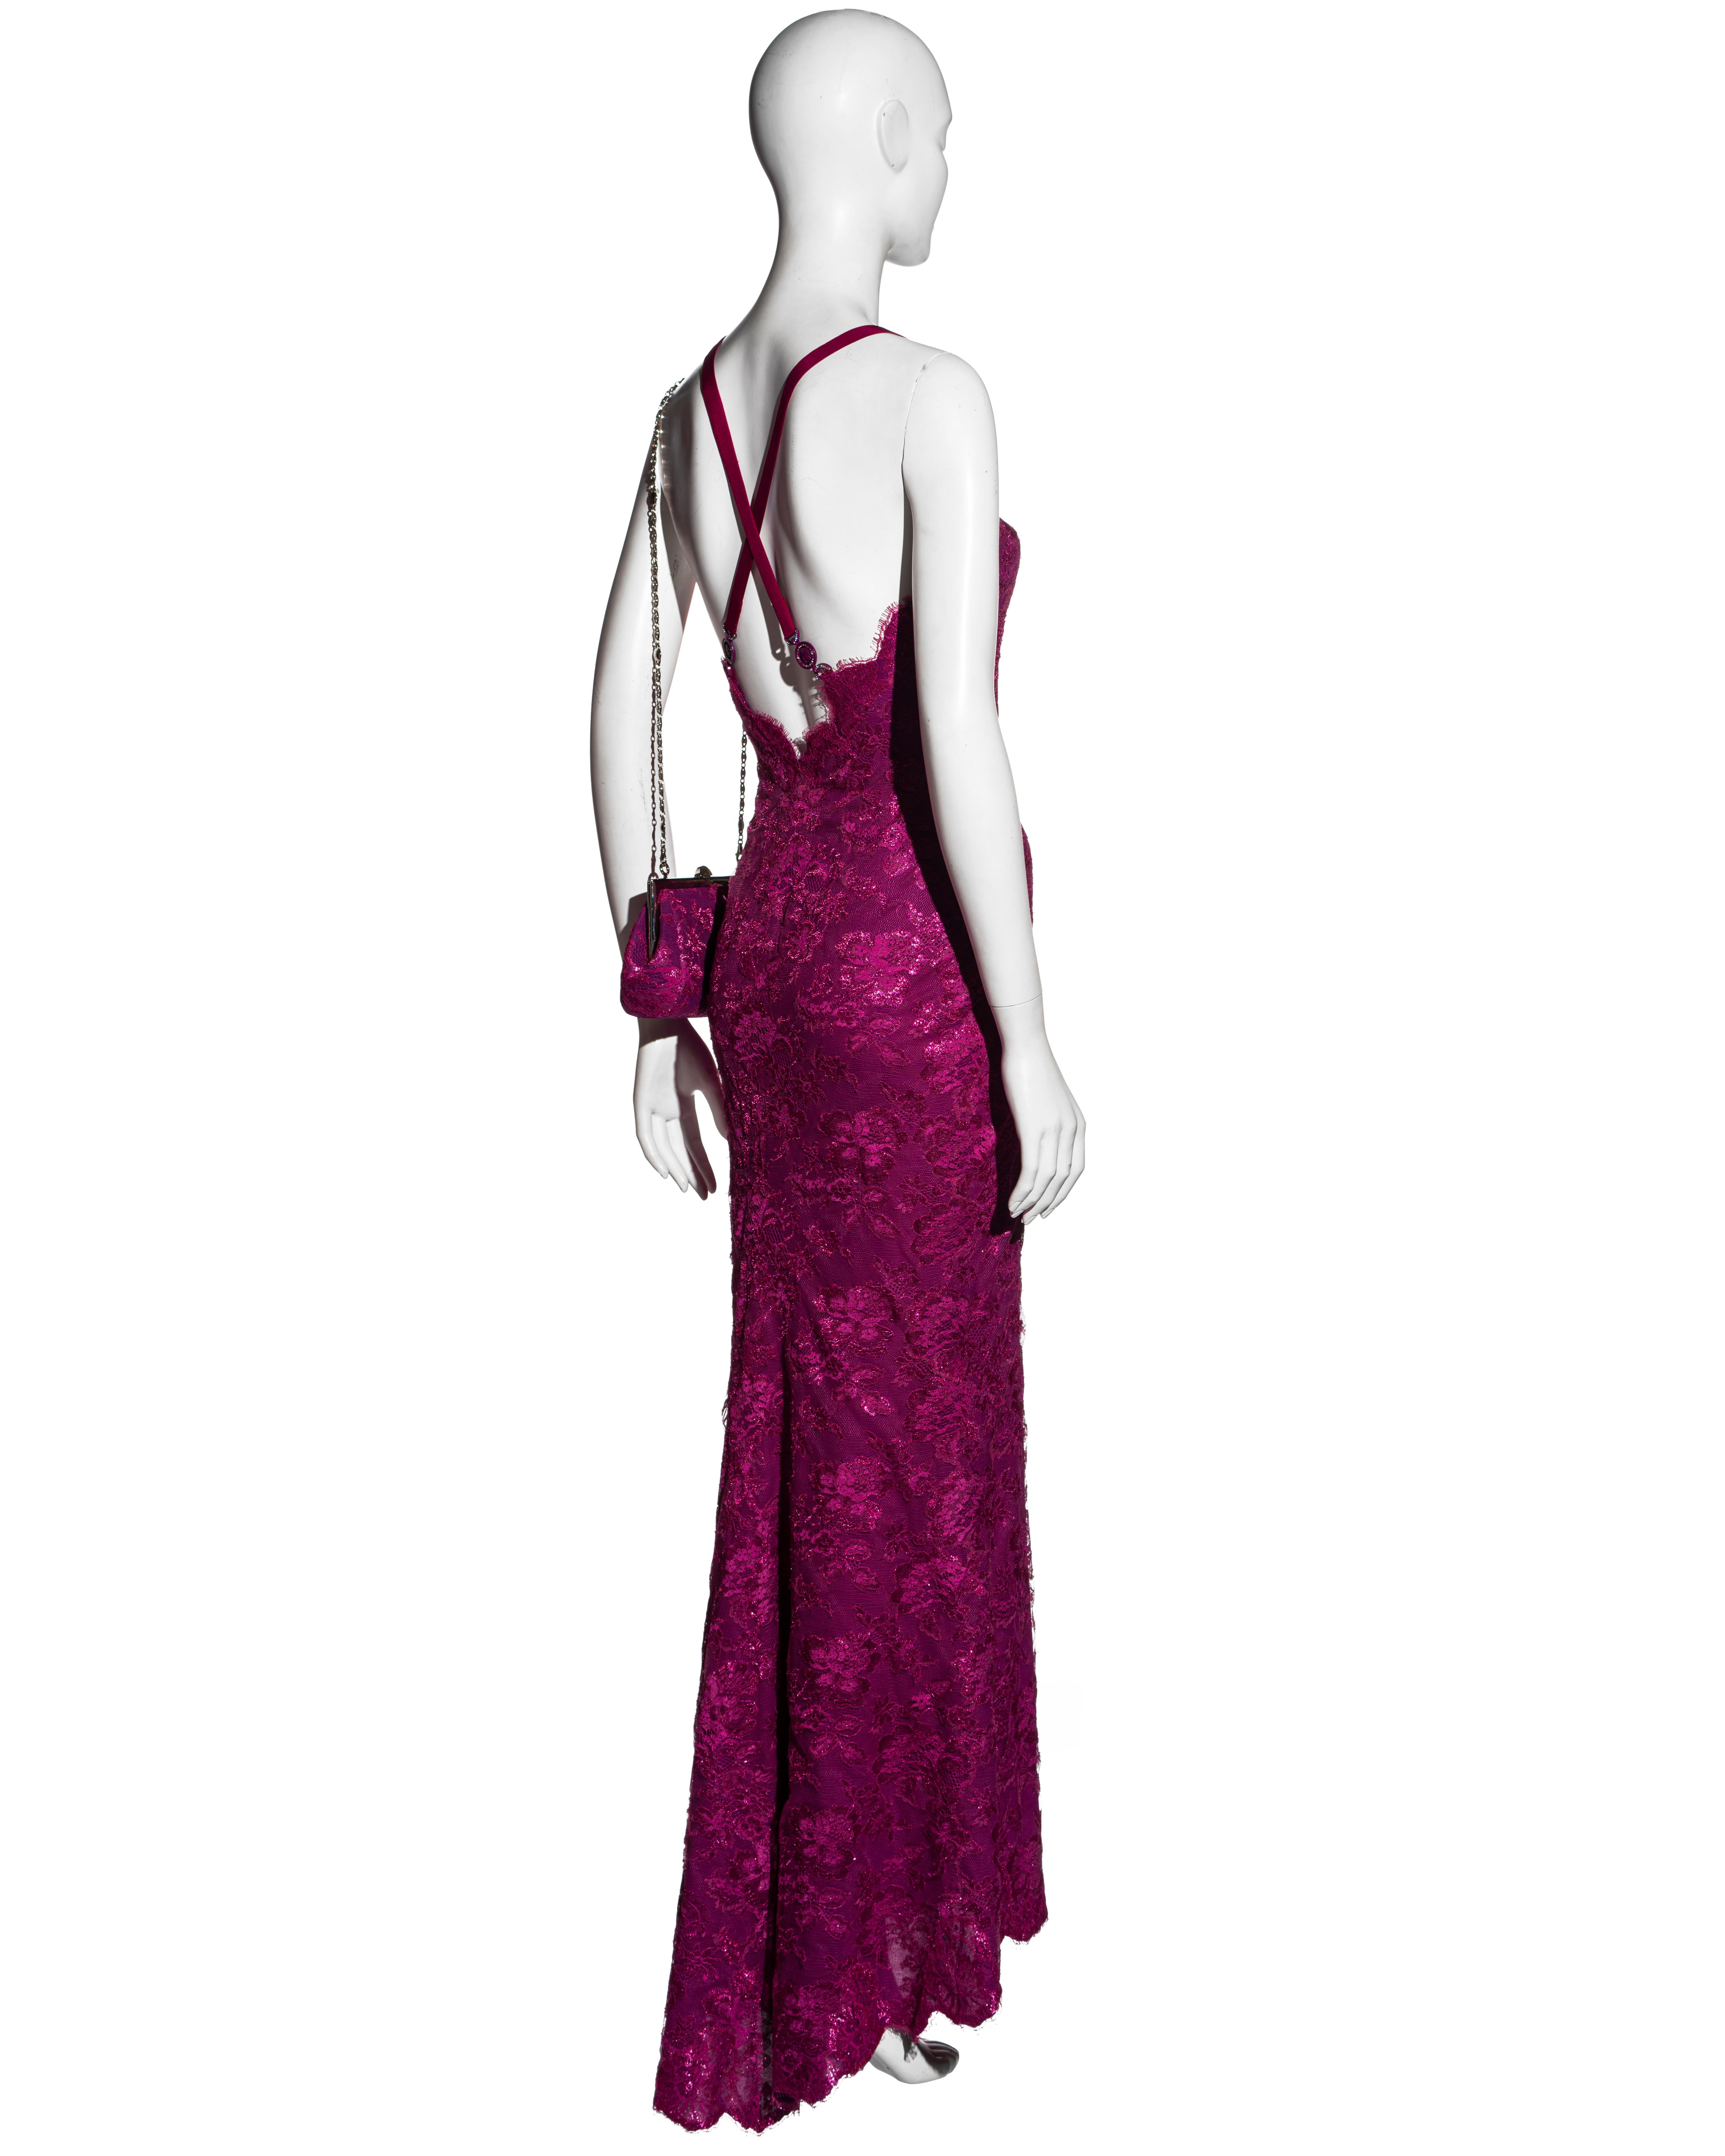 Atelier Versace Haute Couture magenta pink lace evening dress and purse, ss 1996 3